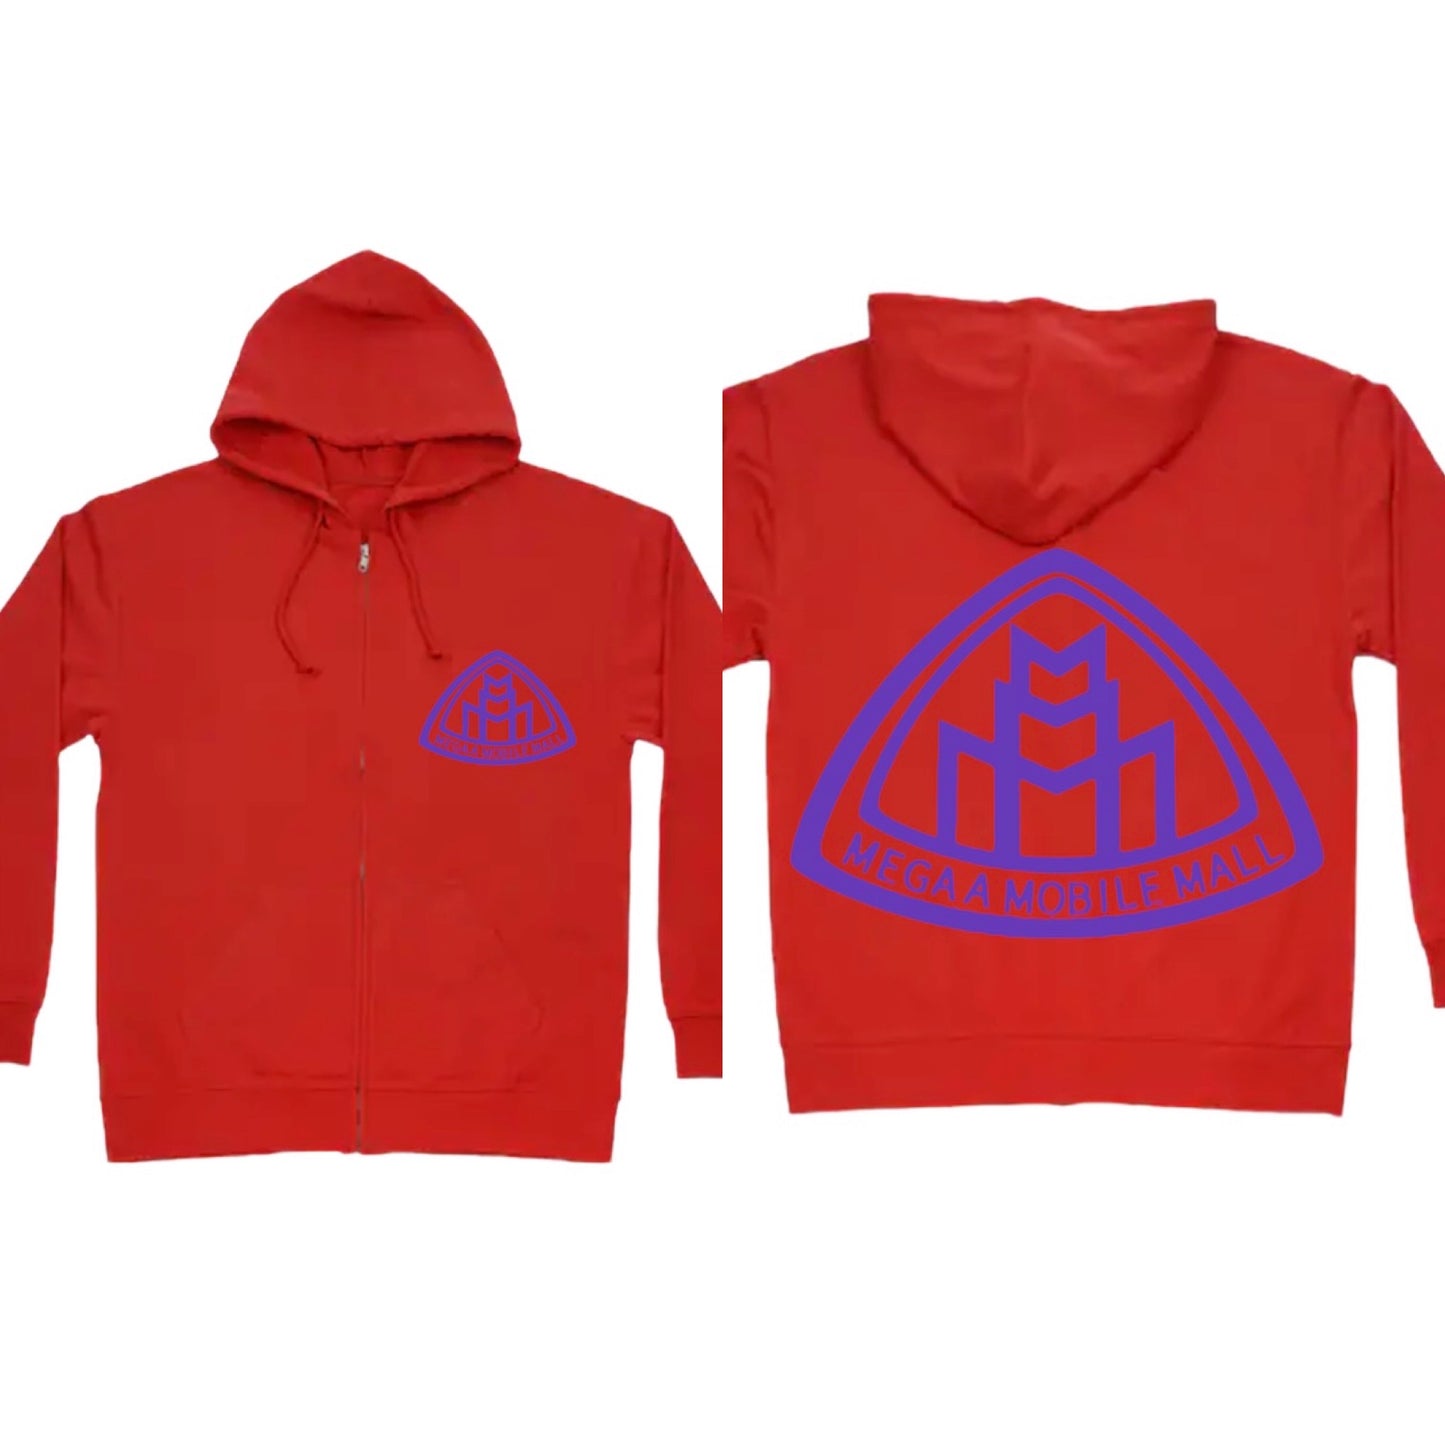 megaamobilemall red zip up hoodie with purple logo